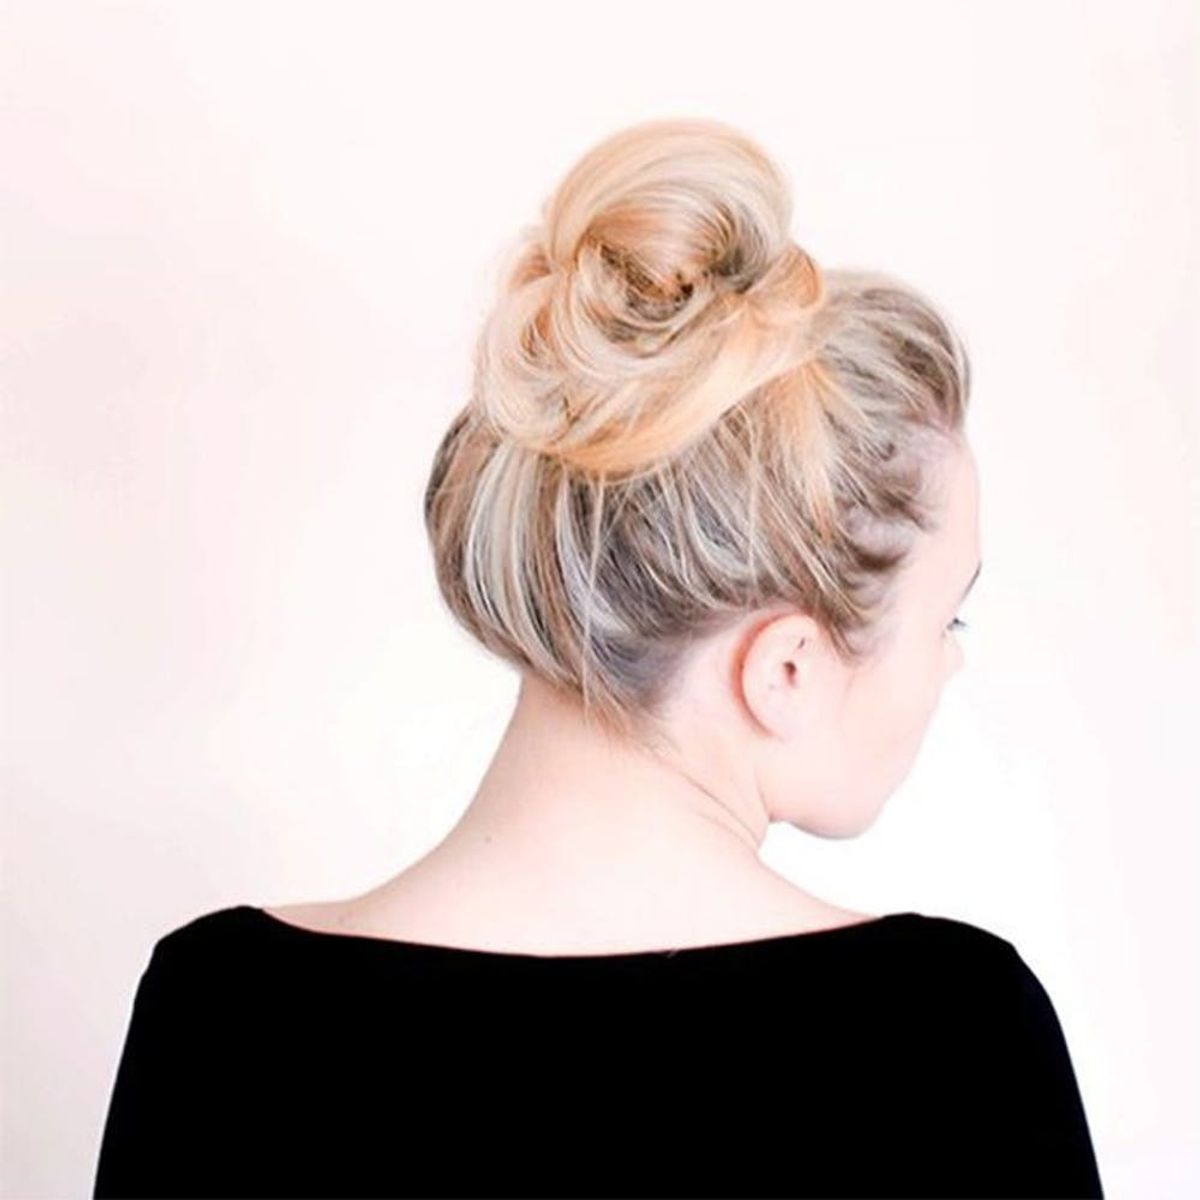 7 Easy Updos to Rock This Winter